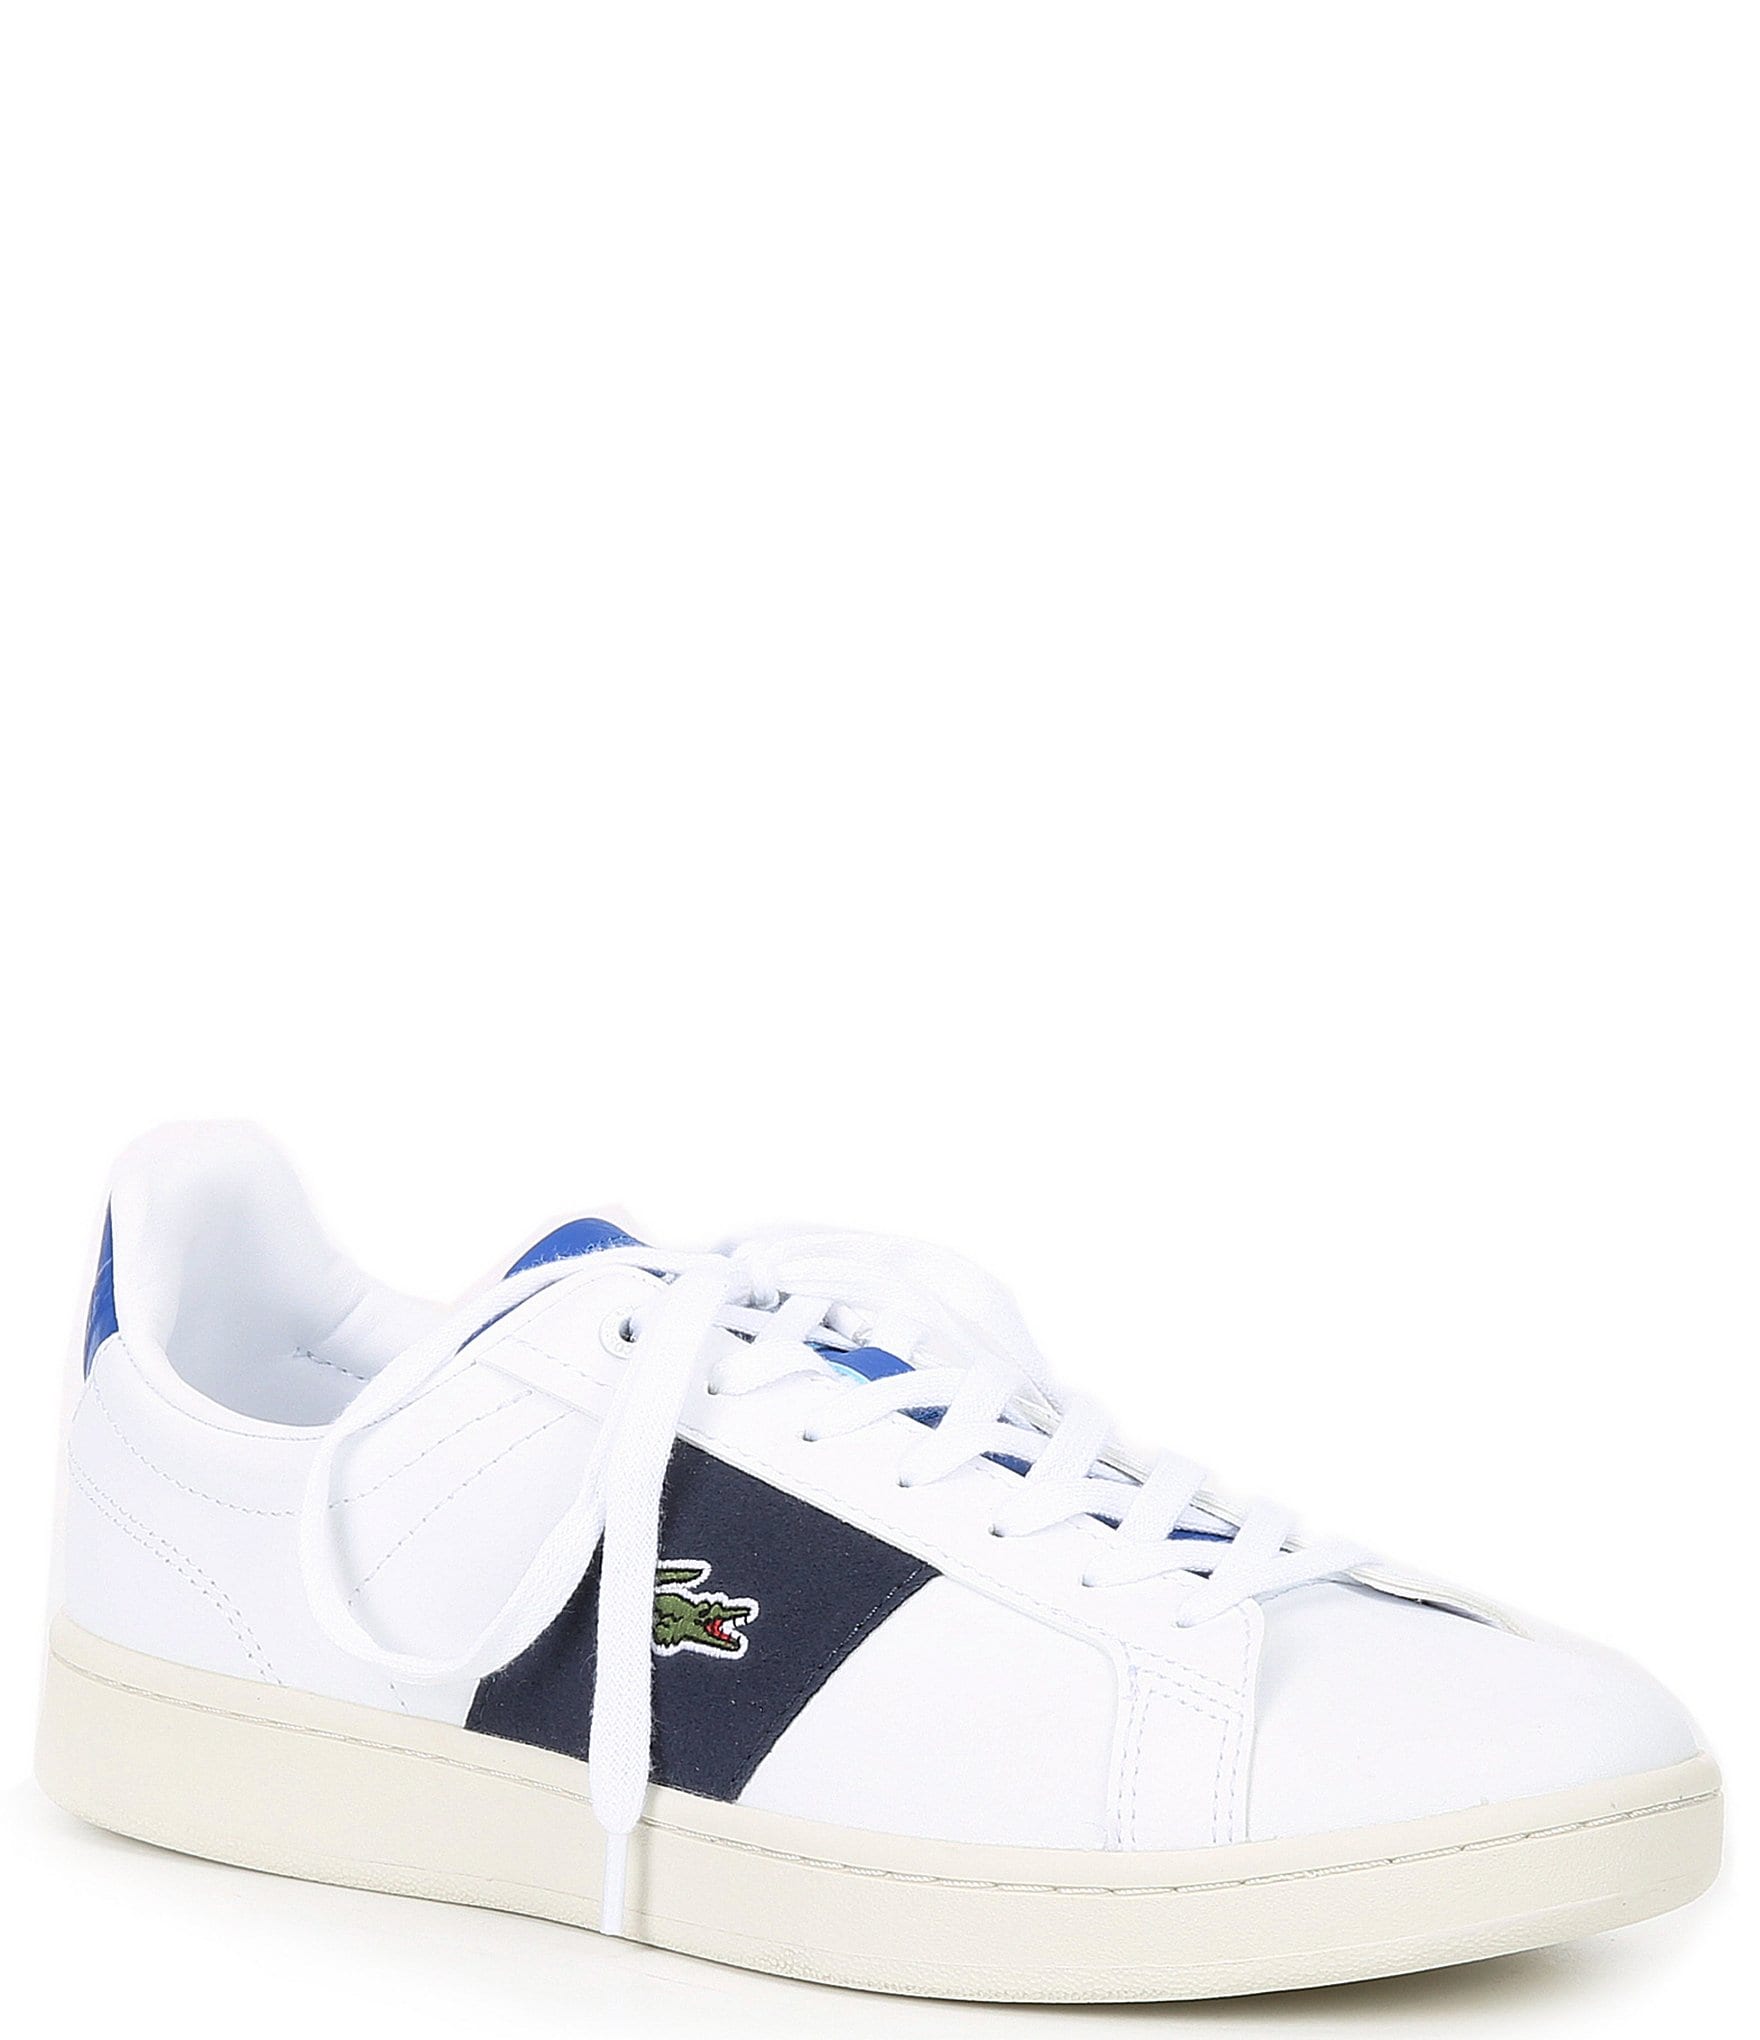 Men's Lacoste Powercourt Leather Casual Shoes | JD Sports